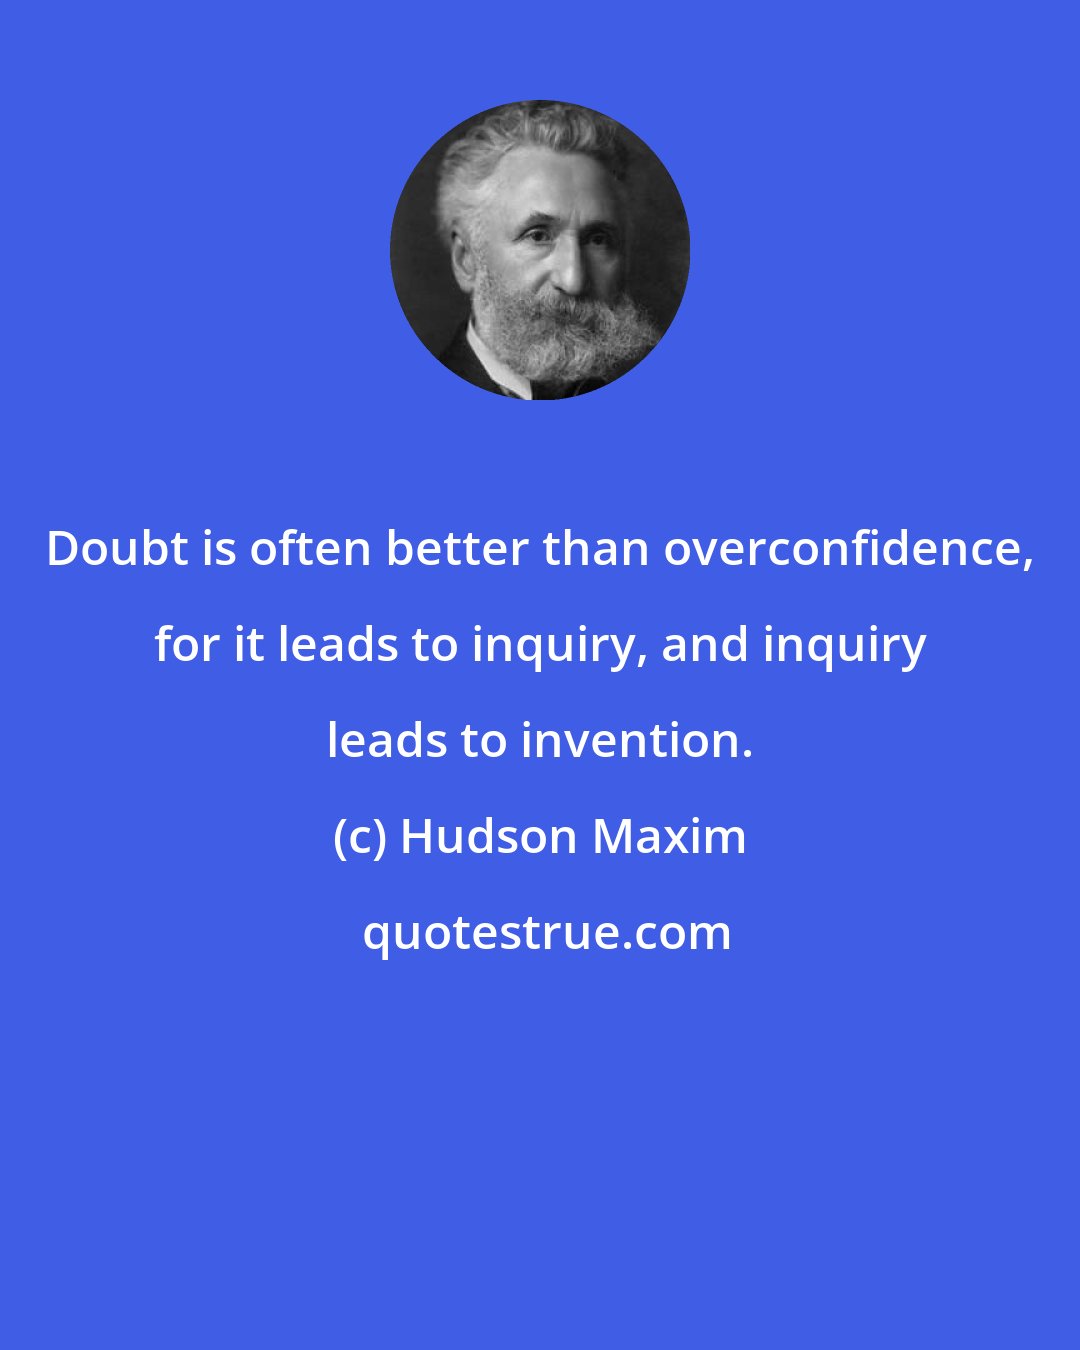 Hudson Maxim: Doubt is often better than overconfidence, for it leads to inquiry, and inquiry leads to invention.